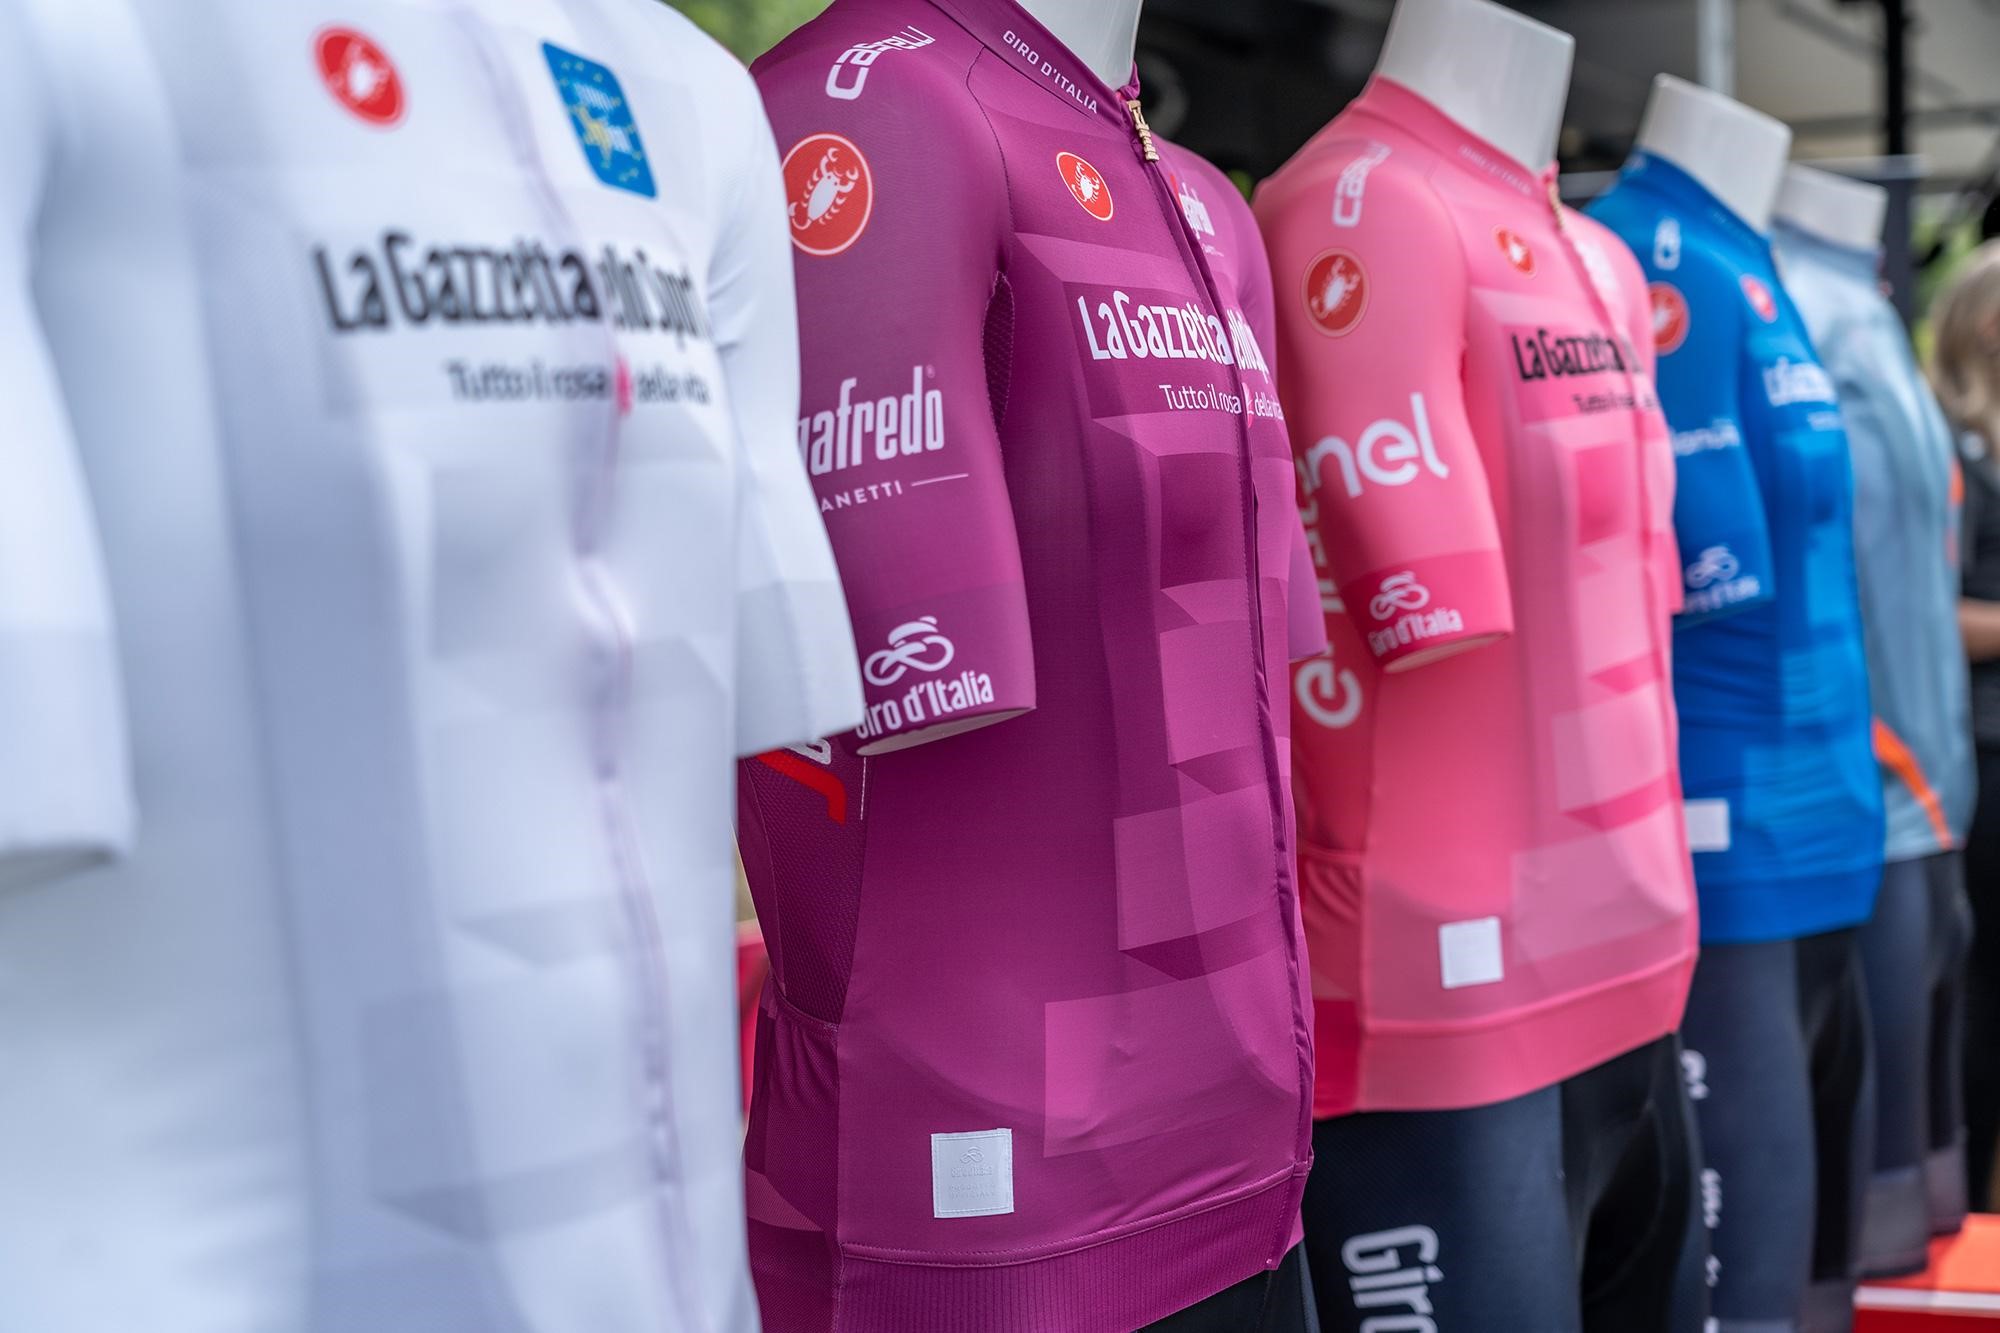 The special Giro jersey categories denoted by colour representations